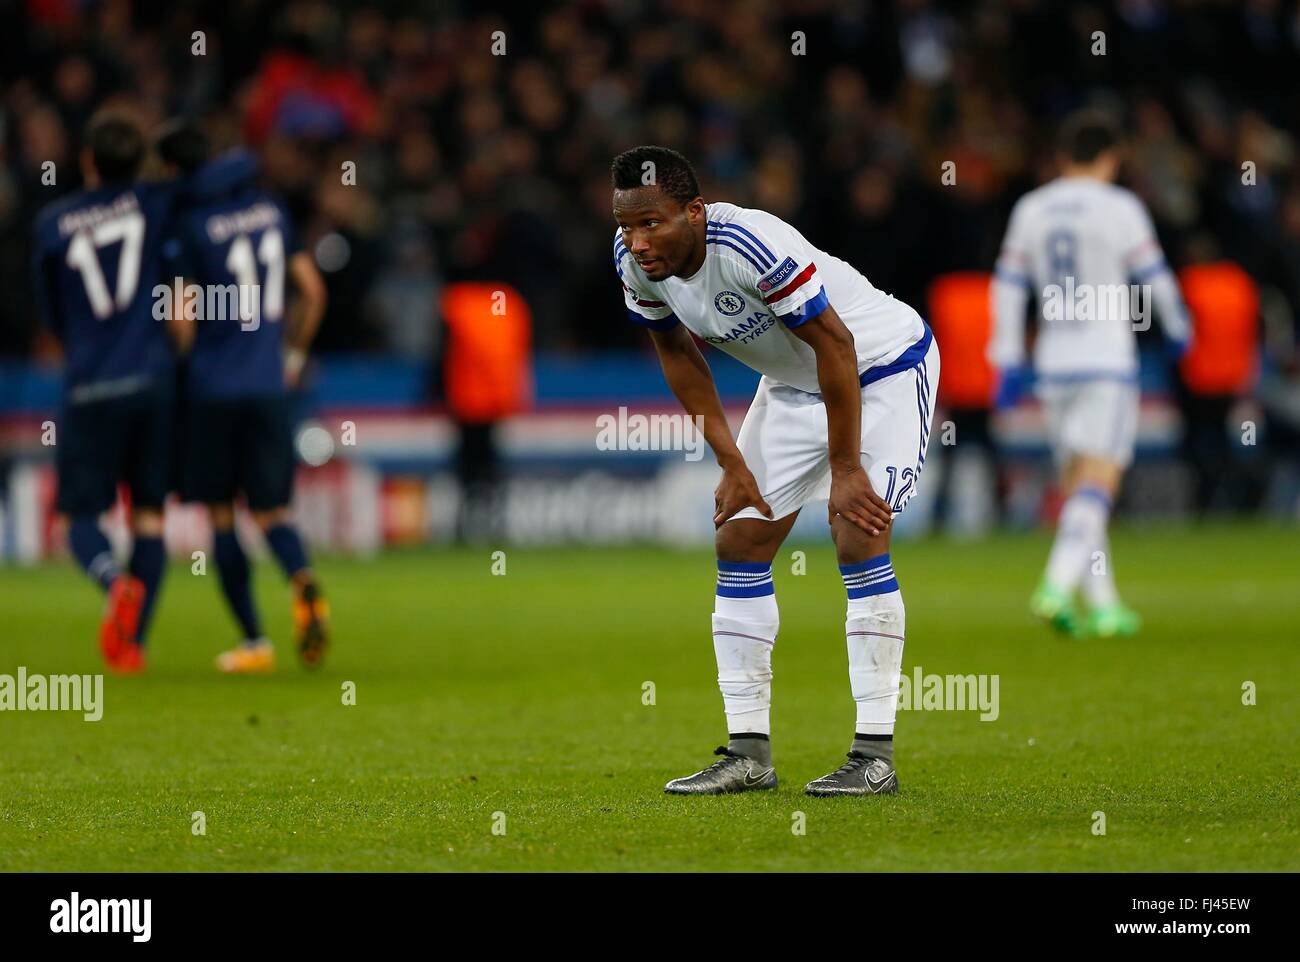 Chelsea’s Mikel John Obi looks dejected after Edinson Cavani's goal during the UEFA Champions League round of 16 match between Paris Saint-Germain and Chelsea at the Parc des Princes Stadium in Paris. February 16, 2016. James Boardman / Telephoto Images +44 7967 642437 Stock Photo